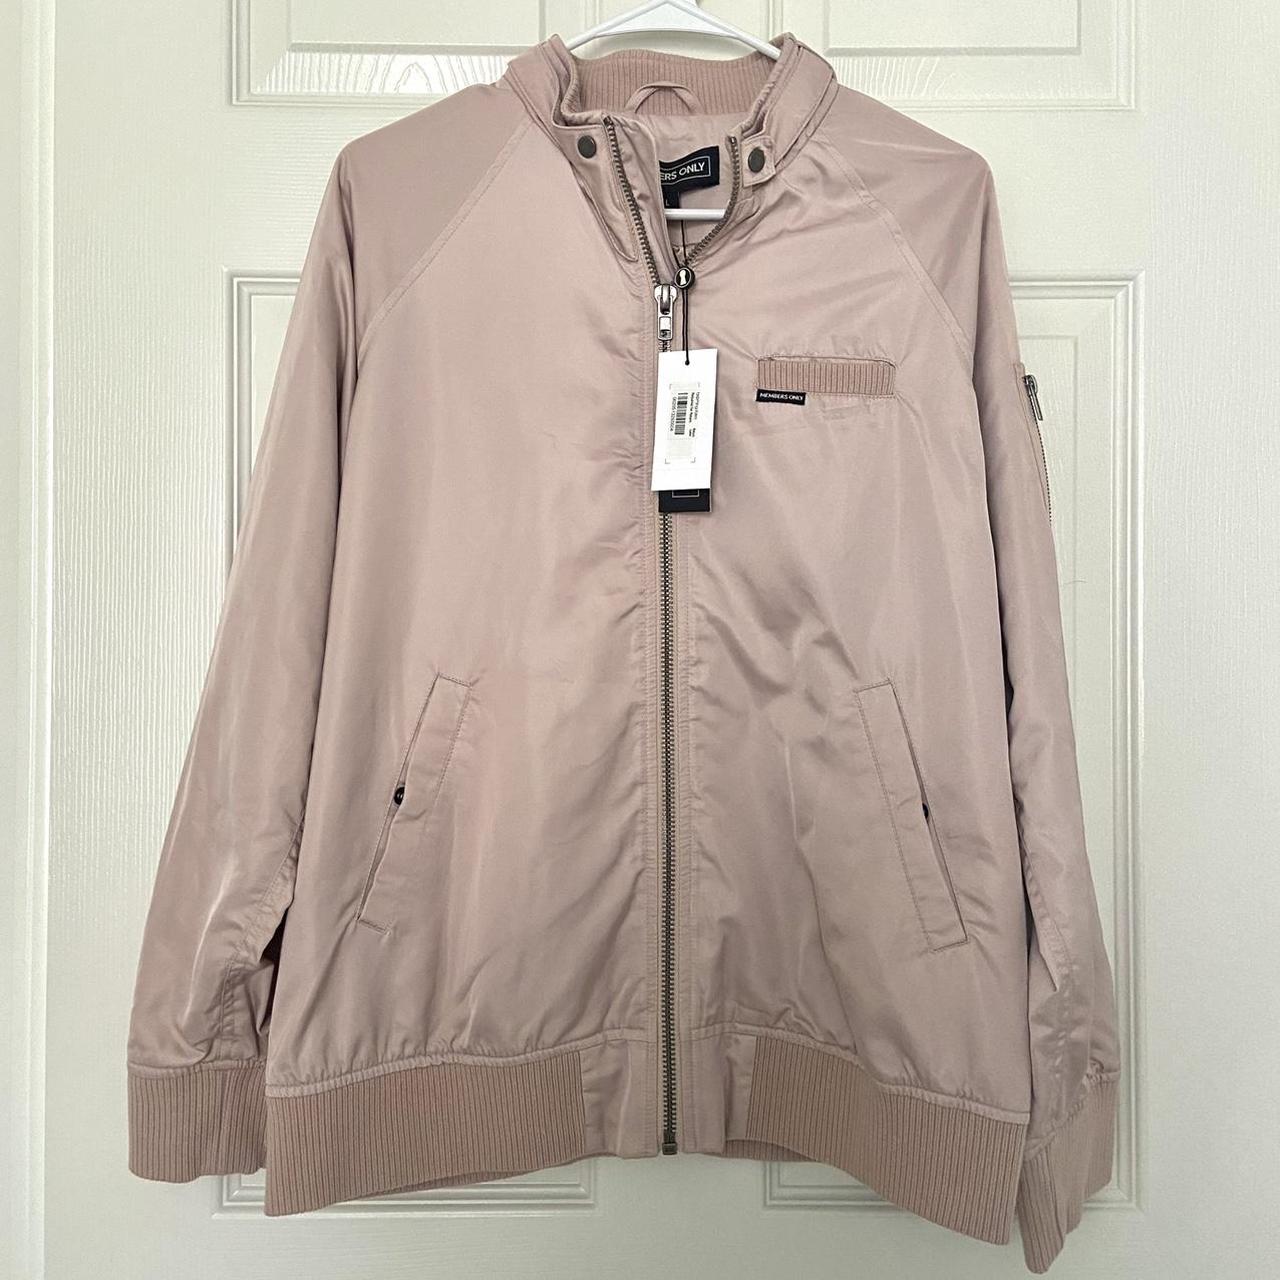 Members Only Women's Pink and Tan Jacket